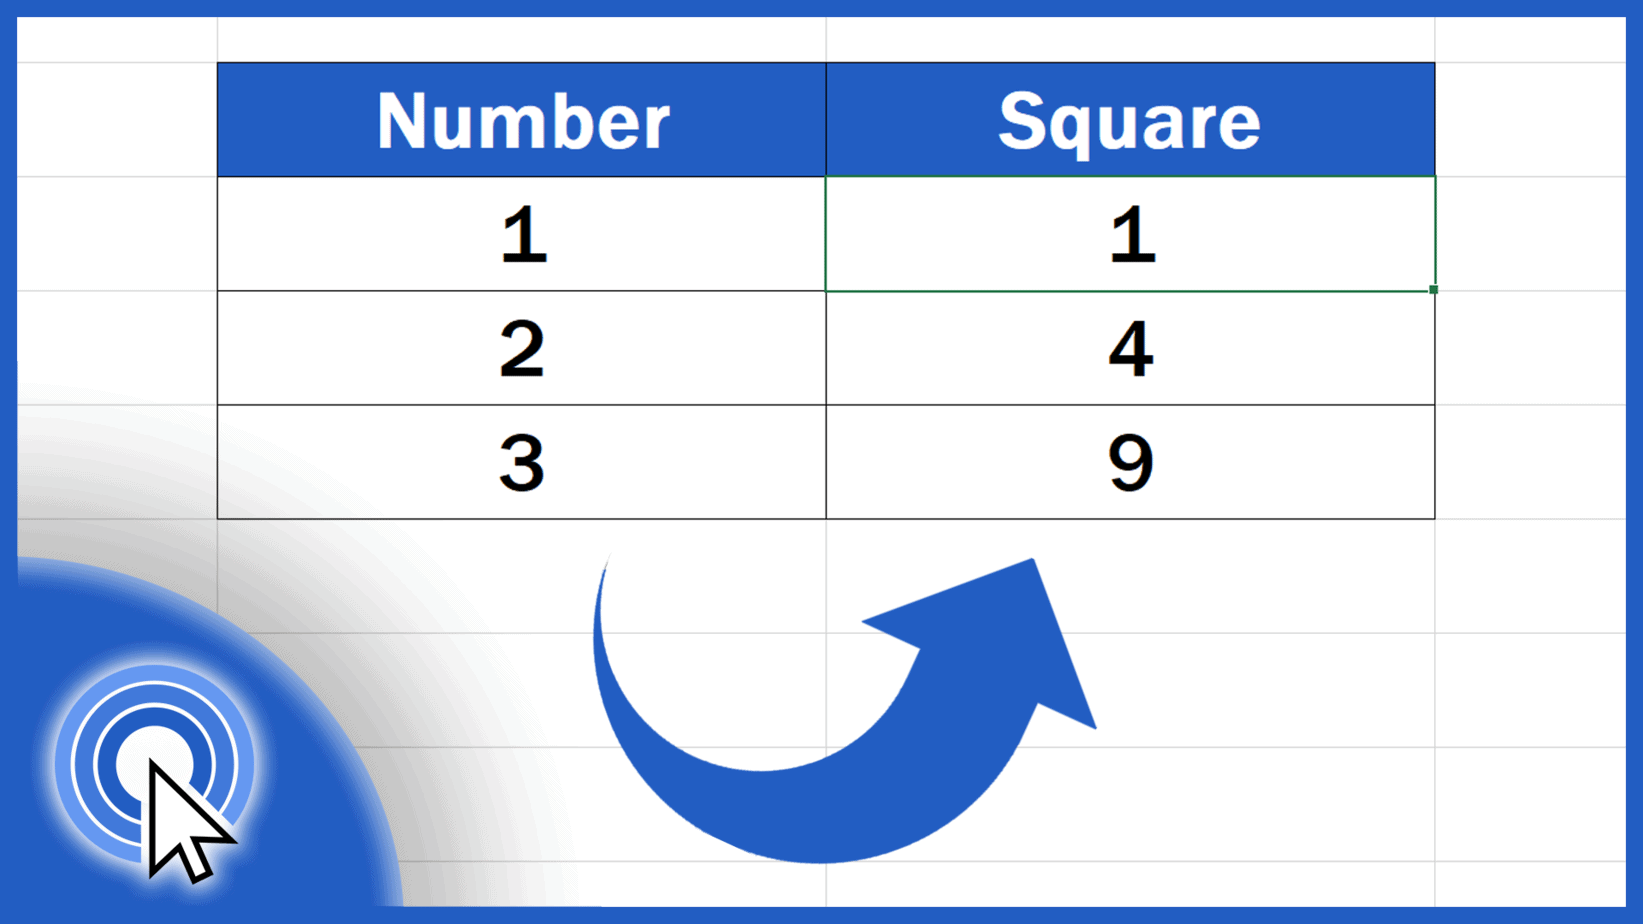 How to Square a Number in Excel